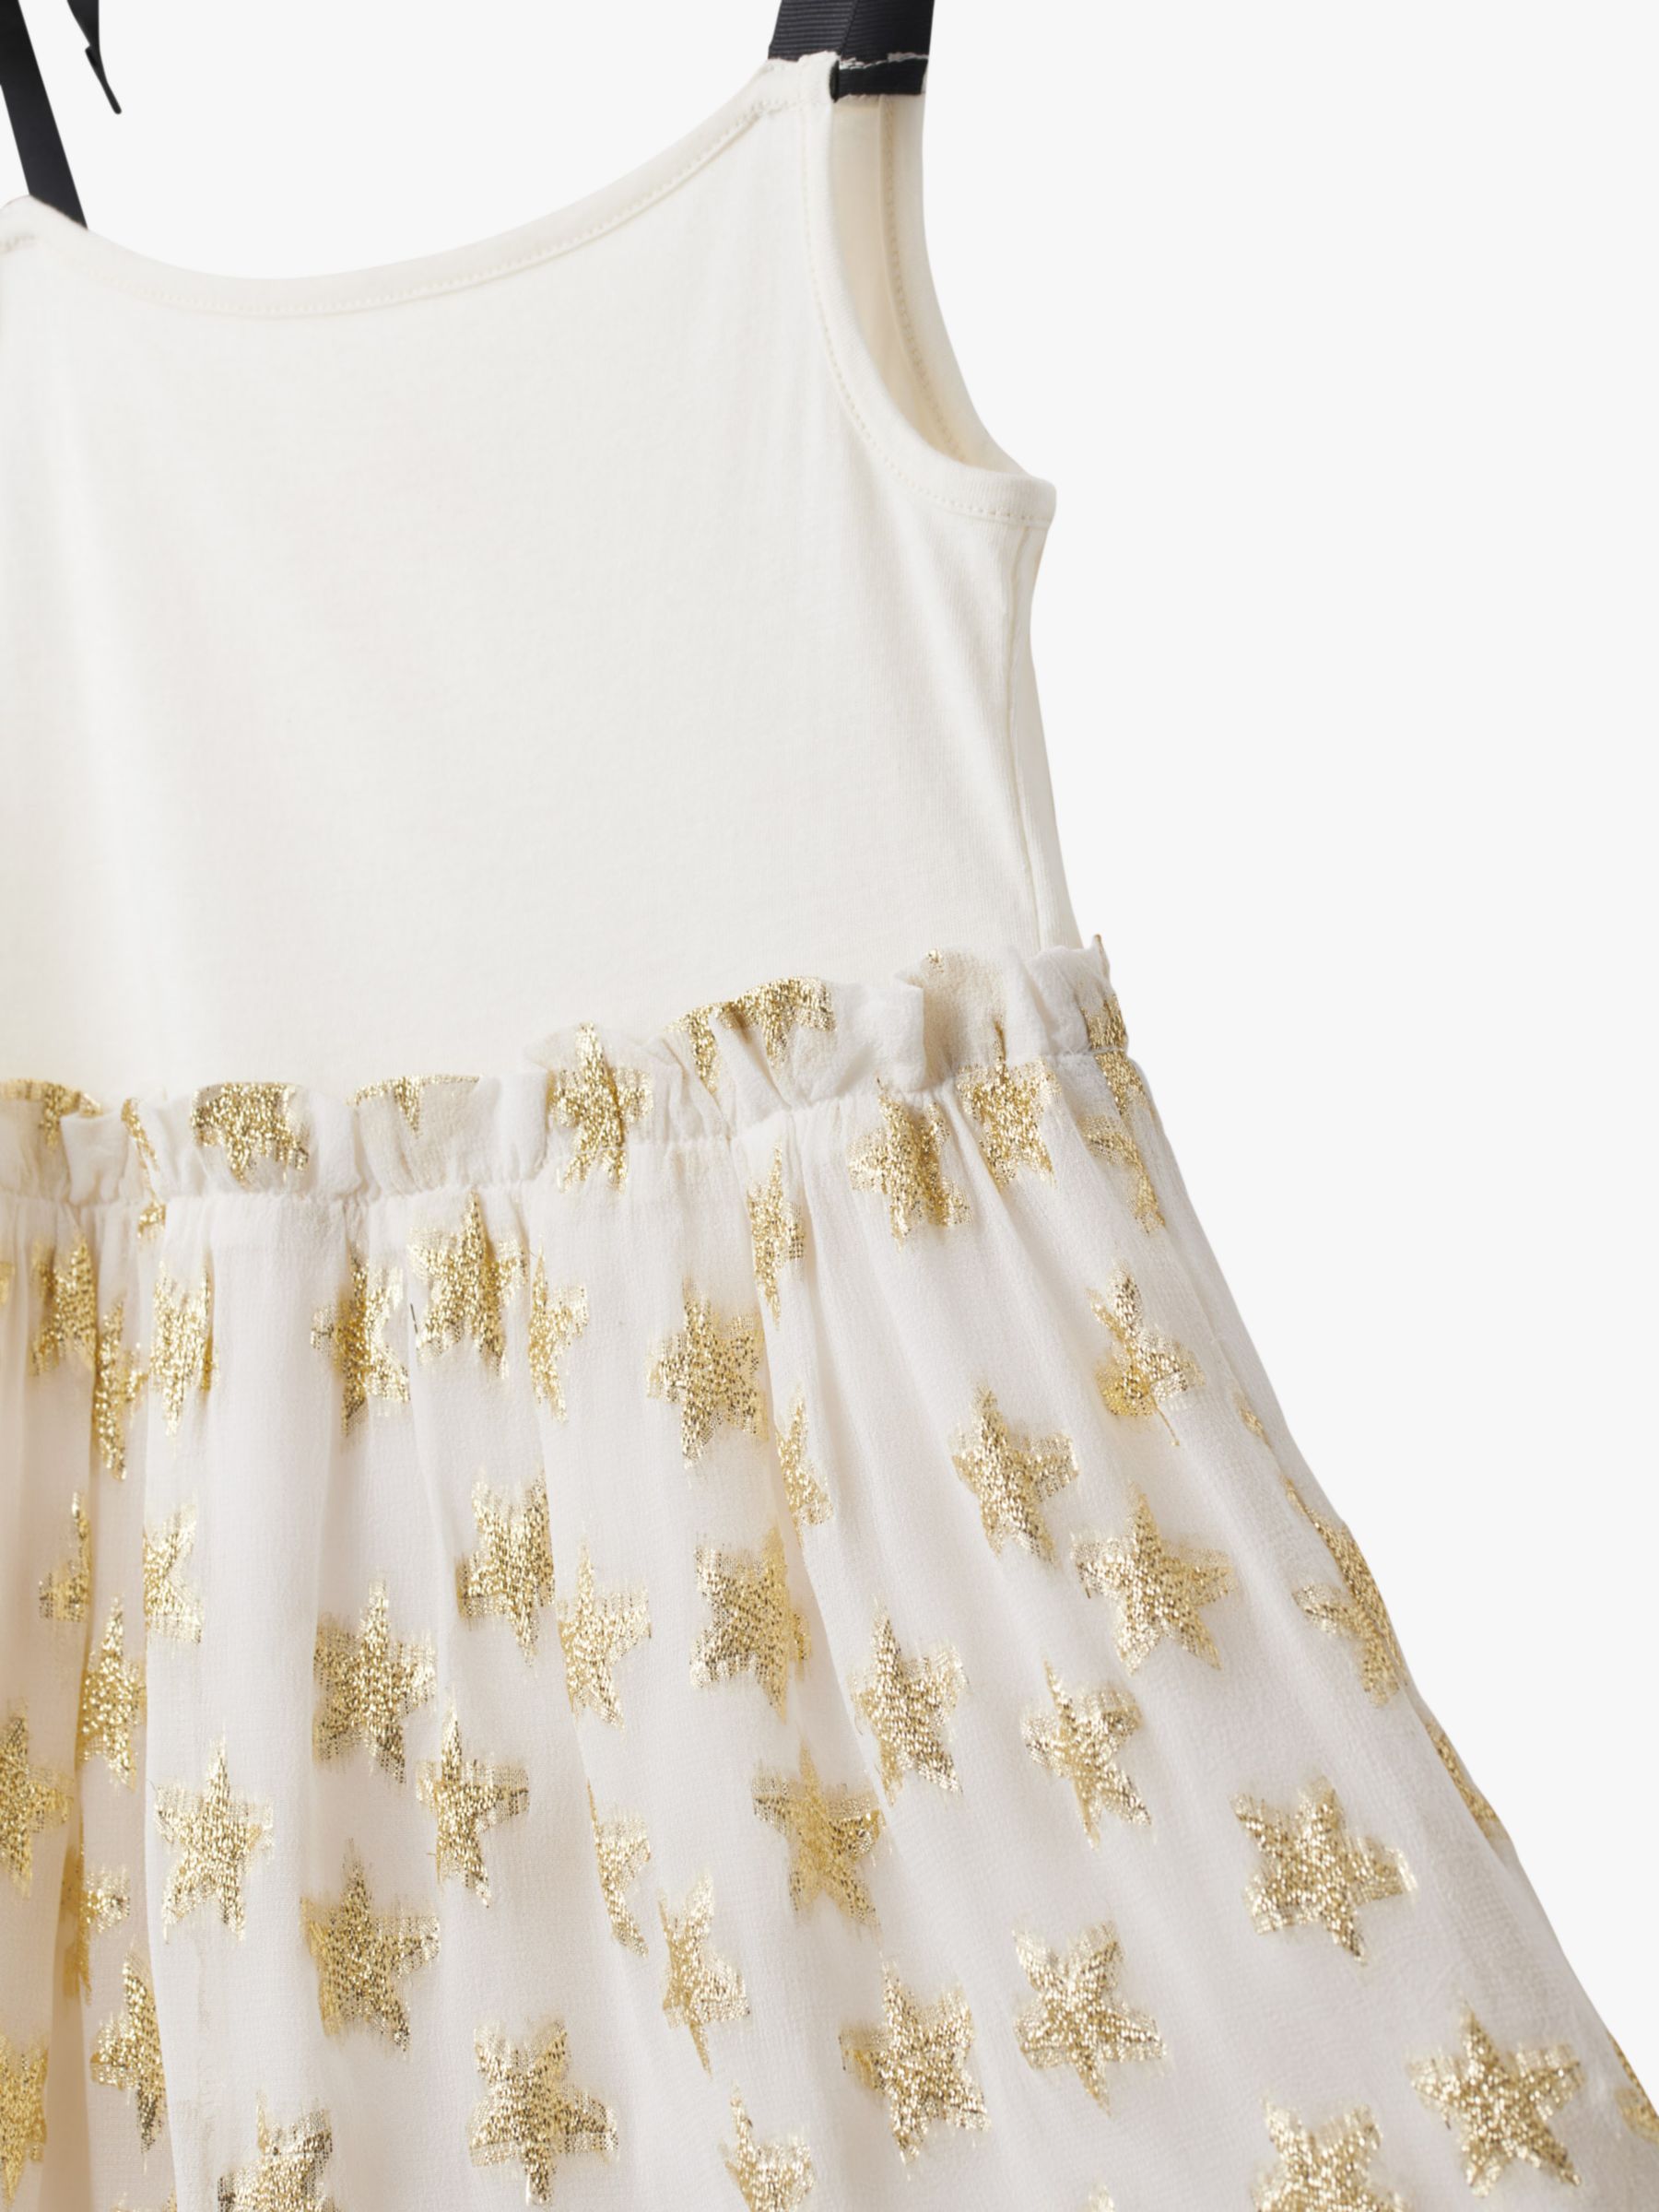 Stych Kids' Pretty Luxe Star Dress, Multi at John Lewis & Partners